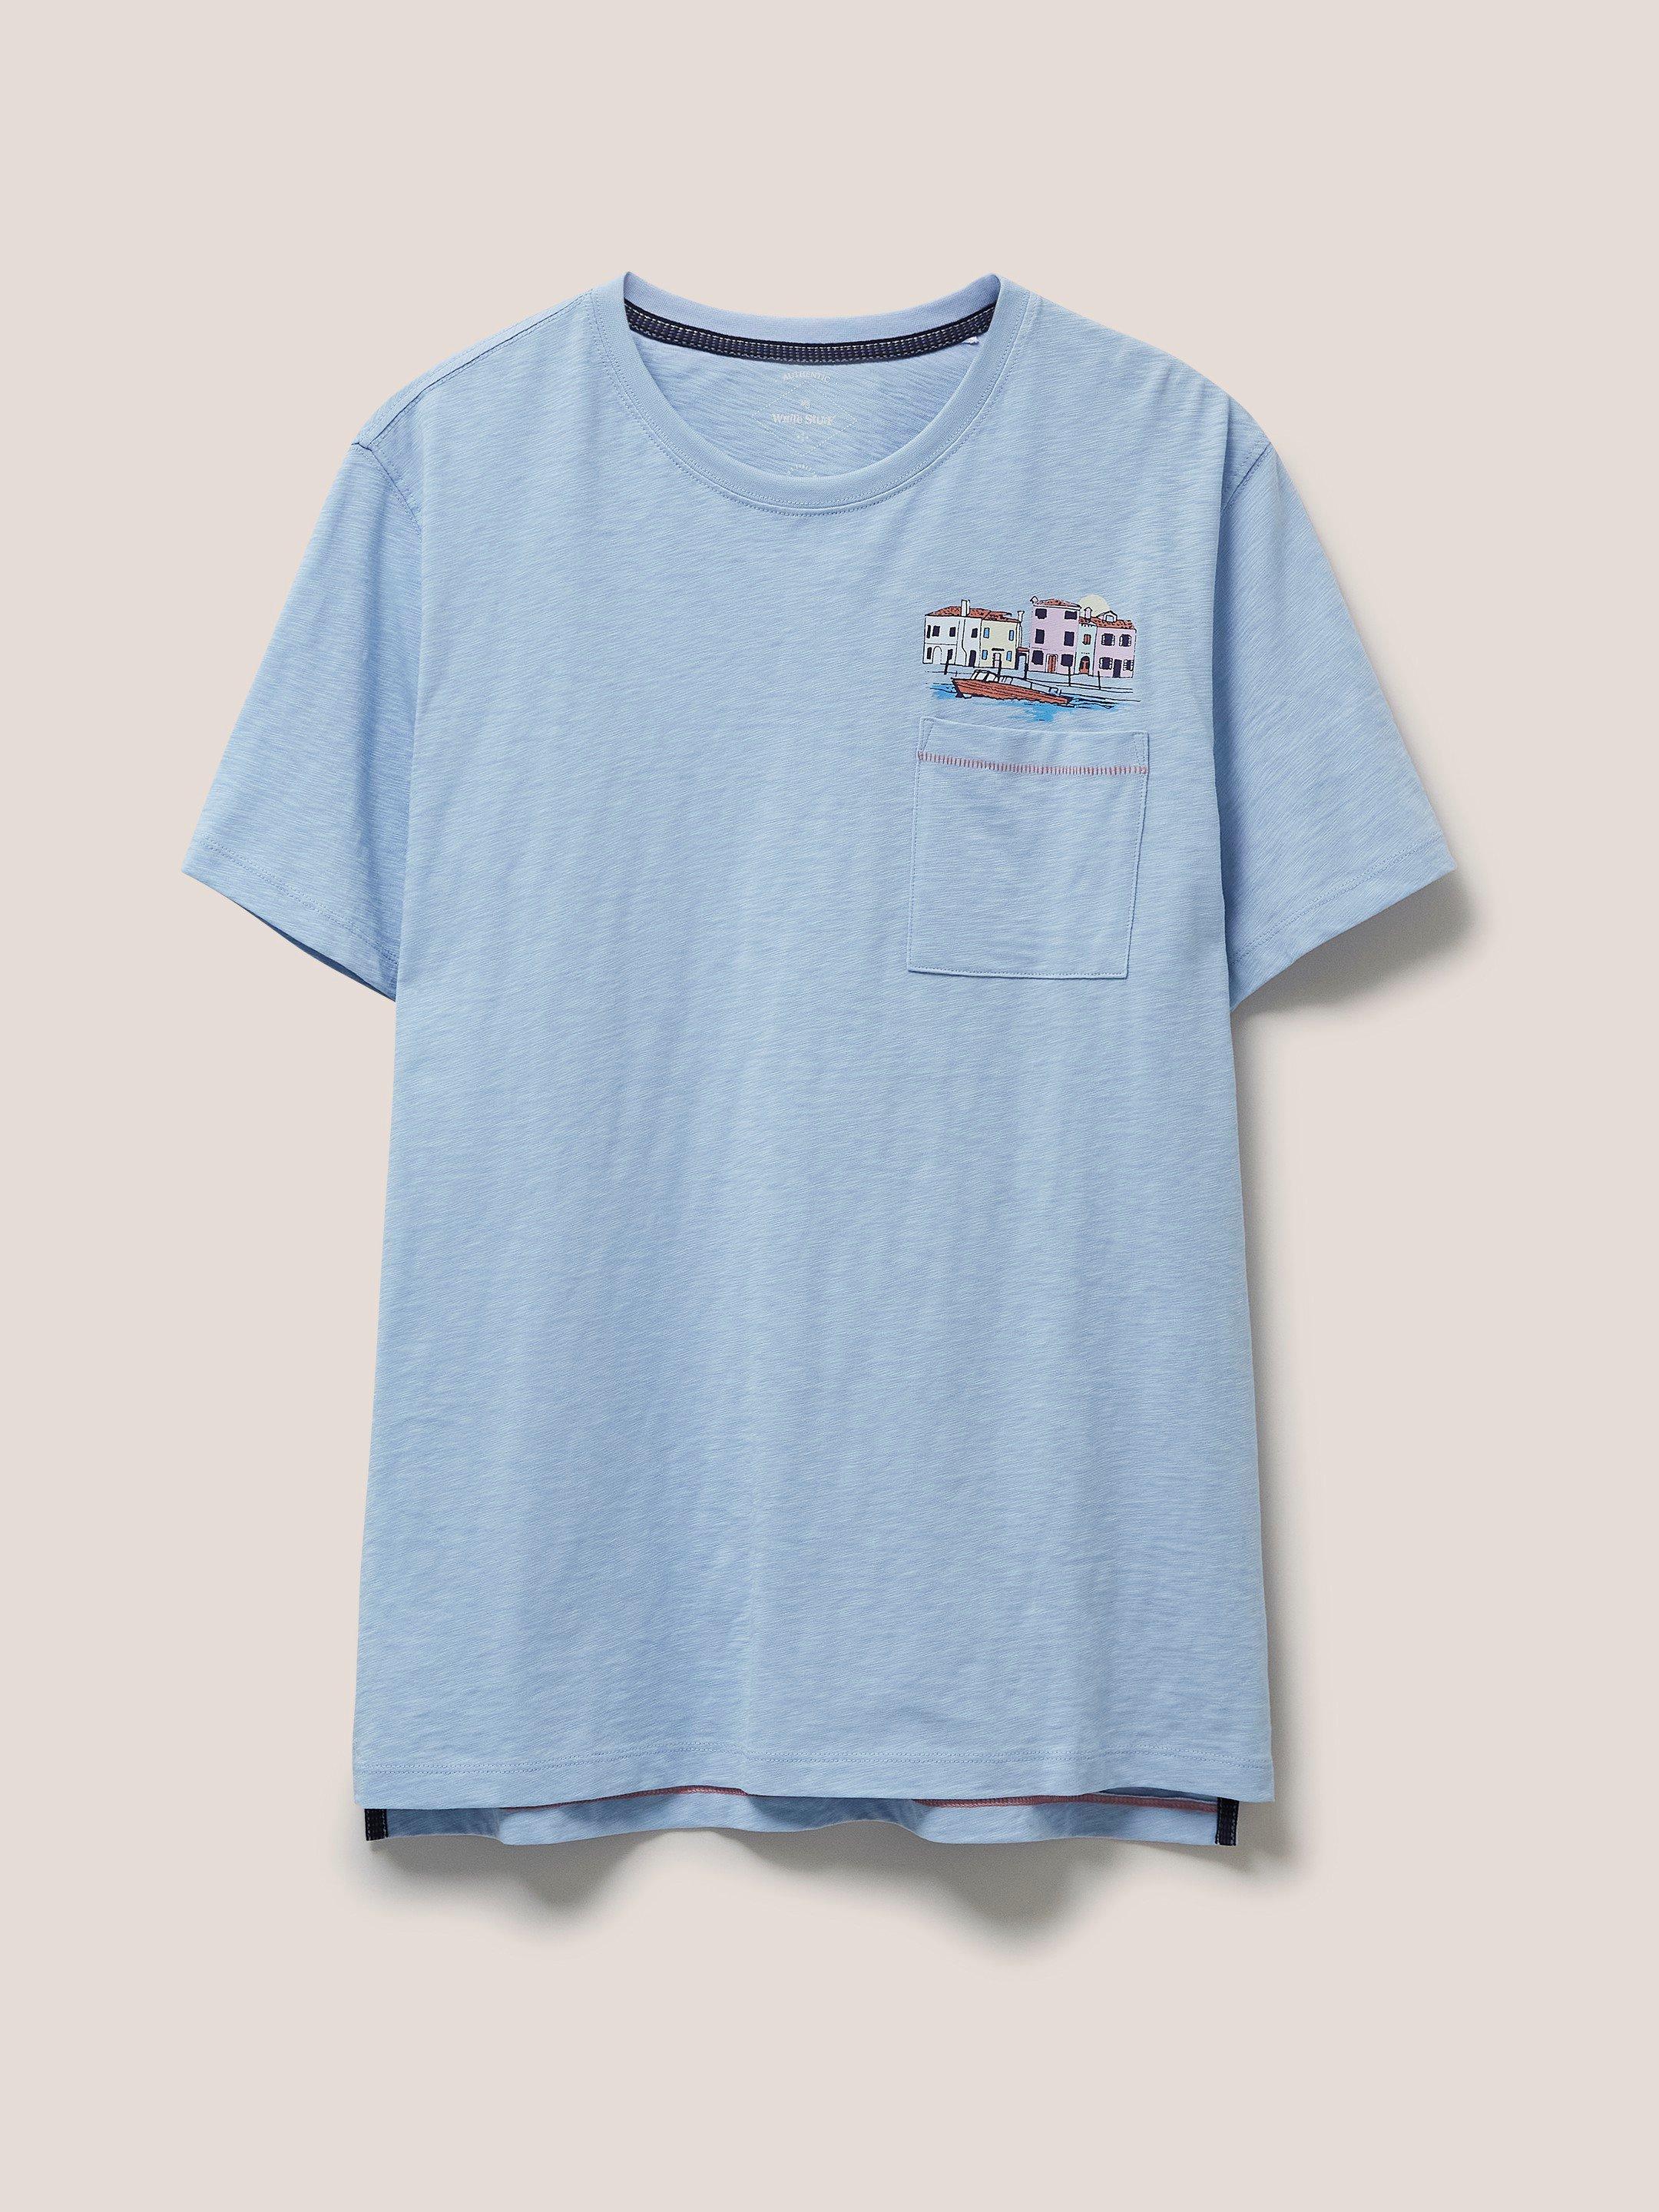 Waterside Graphic Tshirt in LGT BLUE - FLAT FRONT